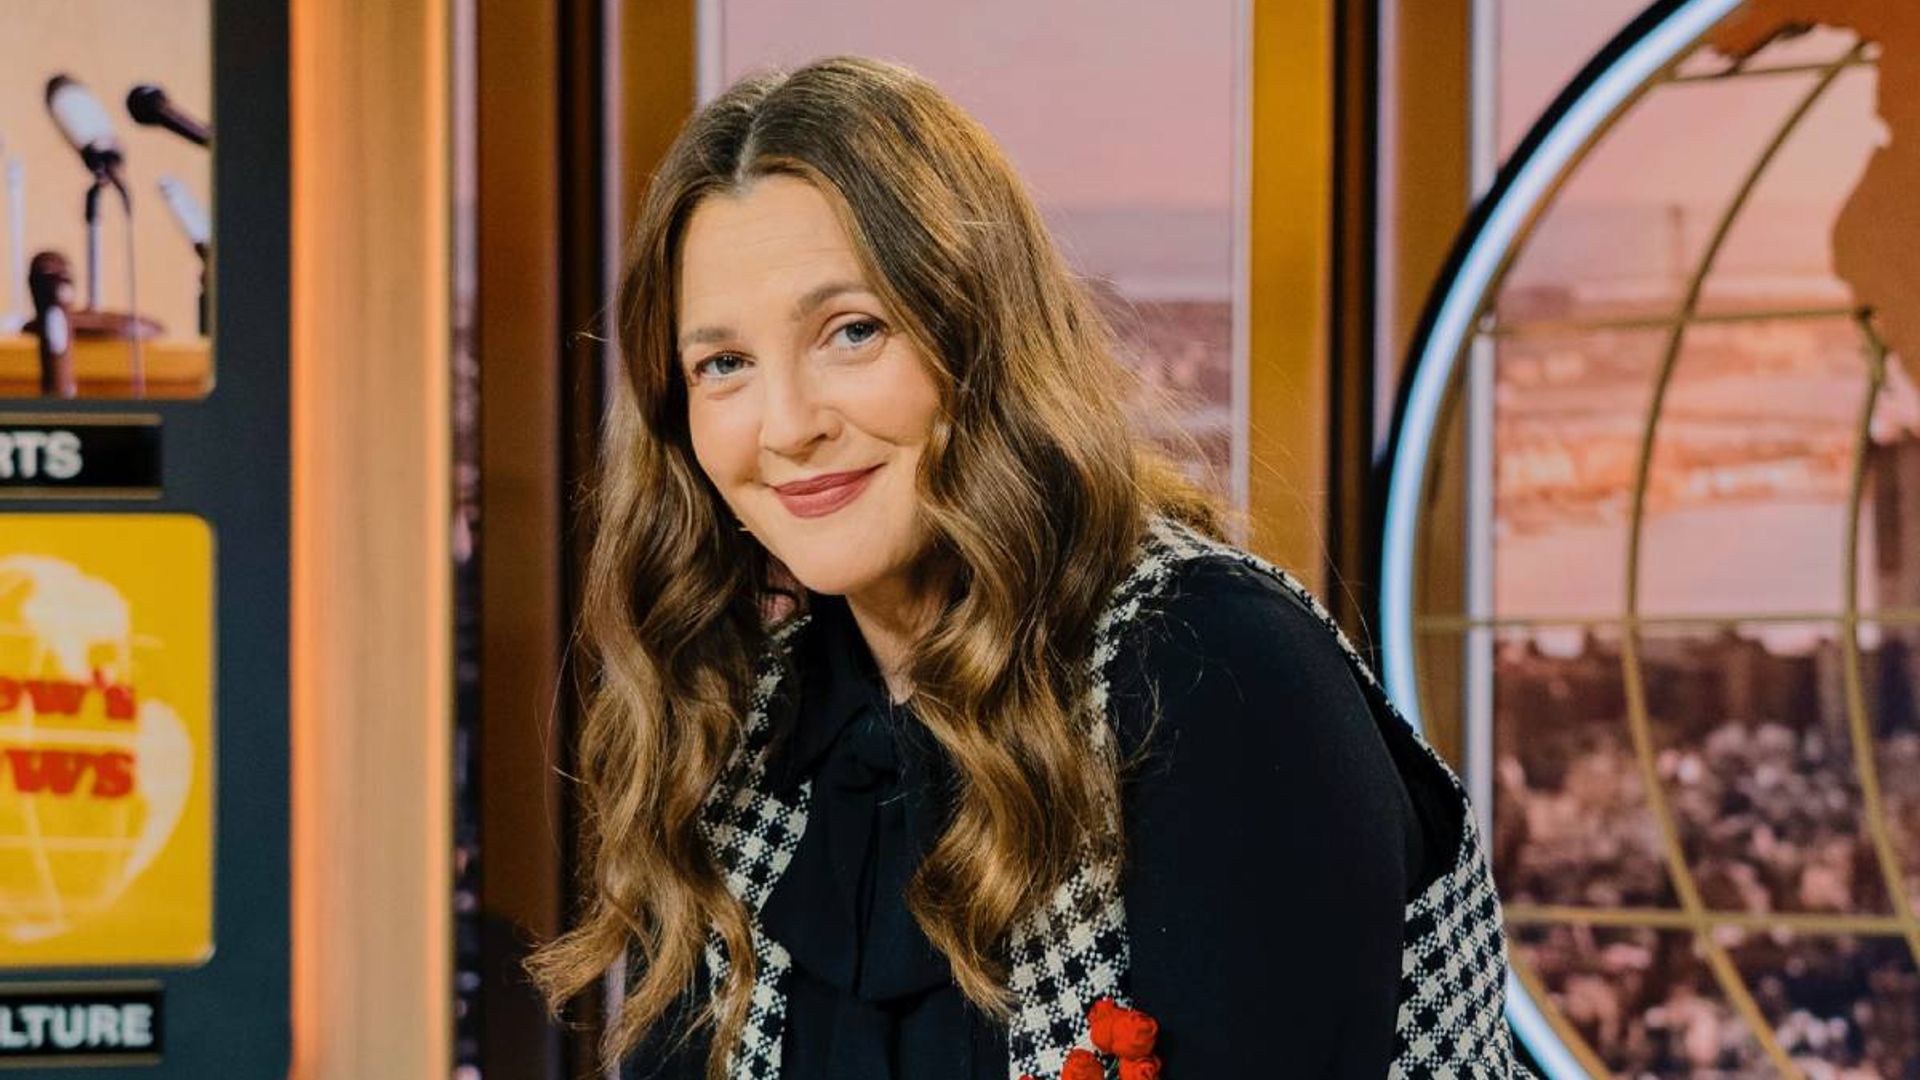 Drew Barrymore shares rare photo of daughters with their stepmother